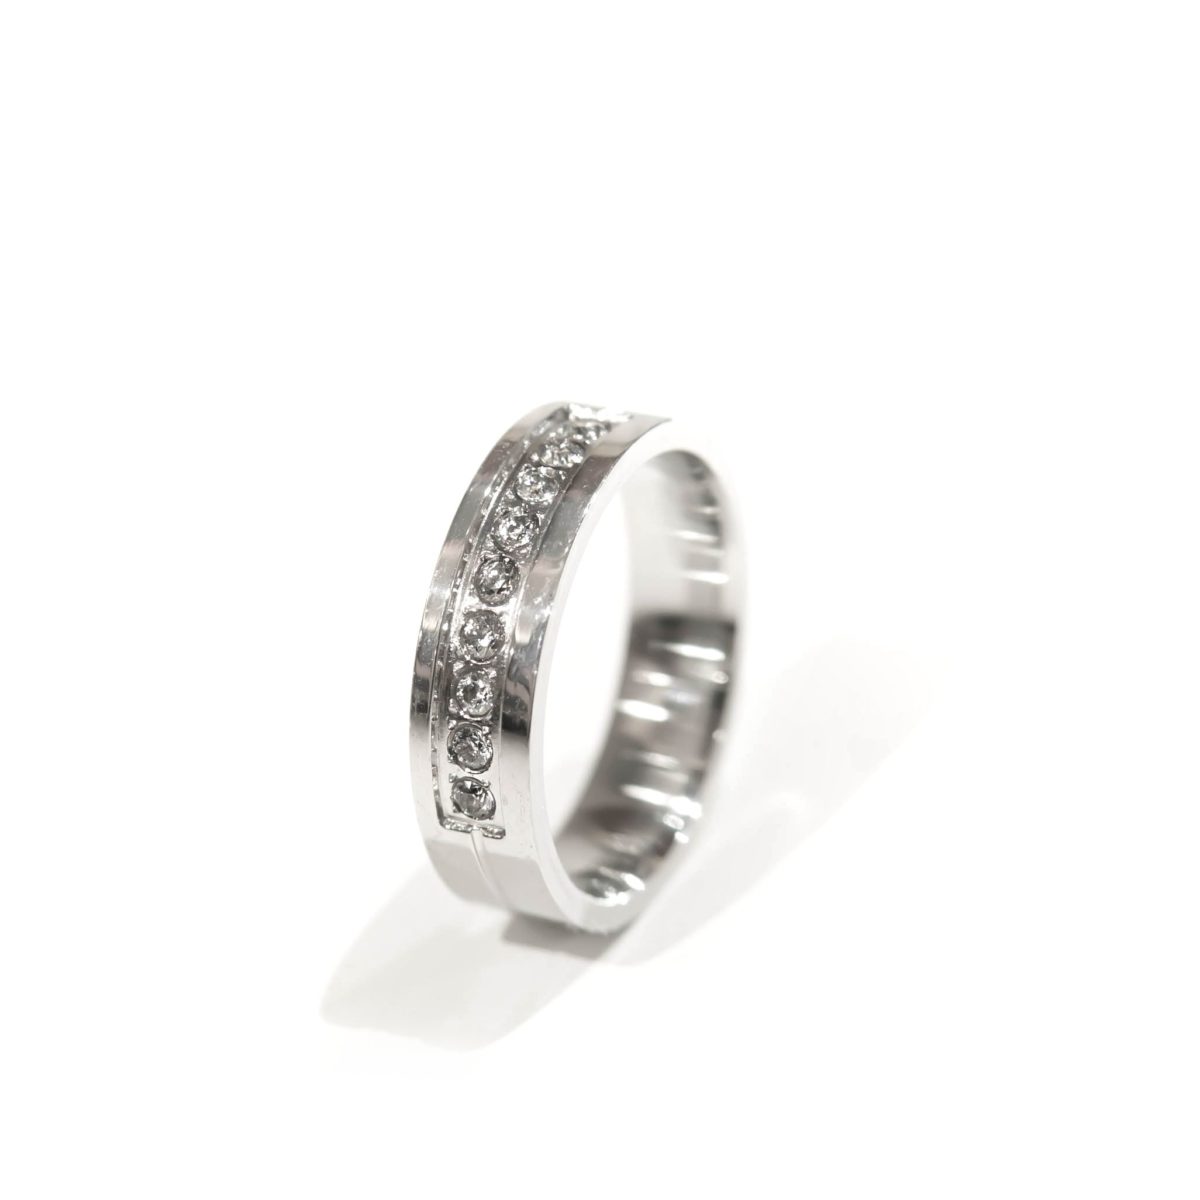 https://m.clubbella.co/product/lucan-striped-zirconia-titanium-ring/ Lucan Striped Zirconia Titanium Ring (2)